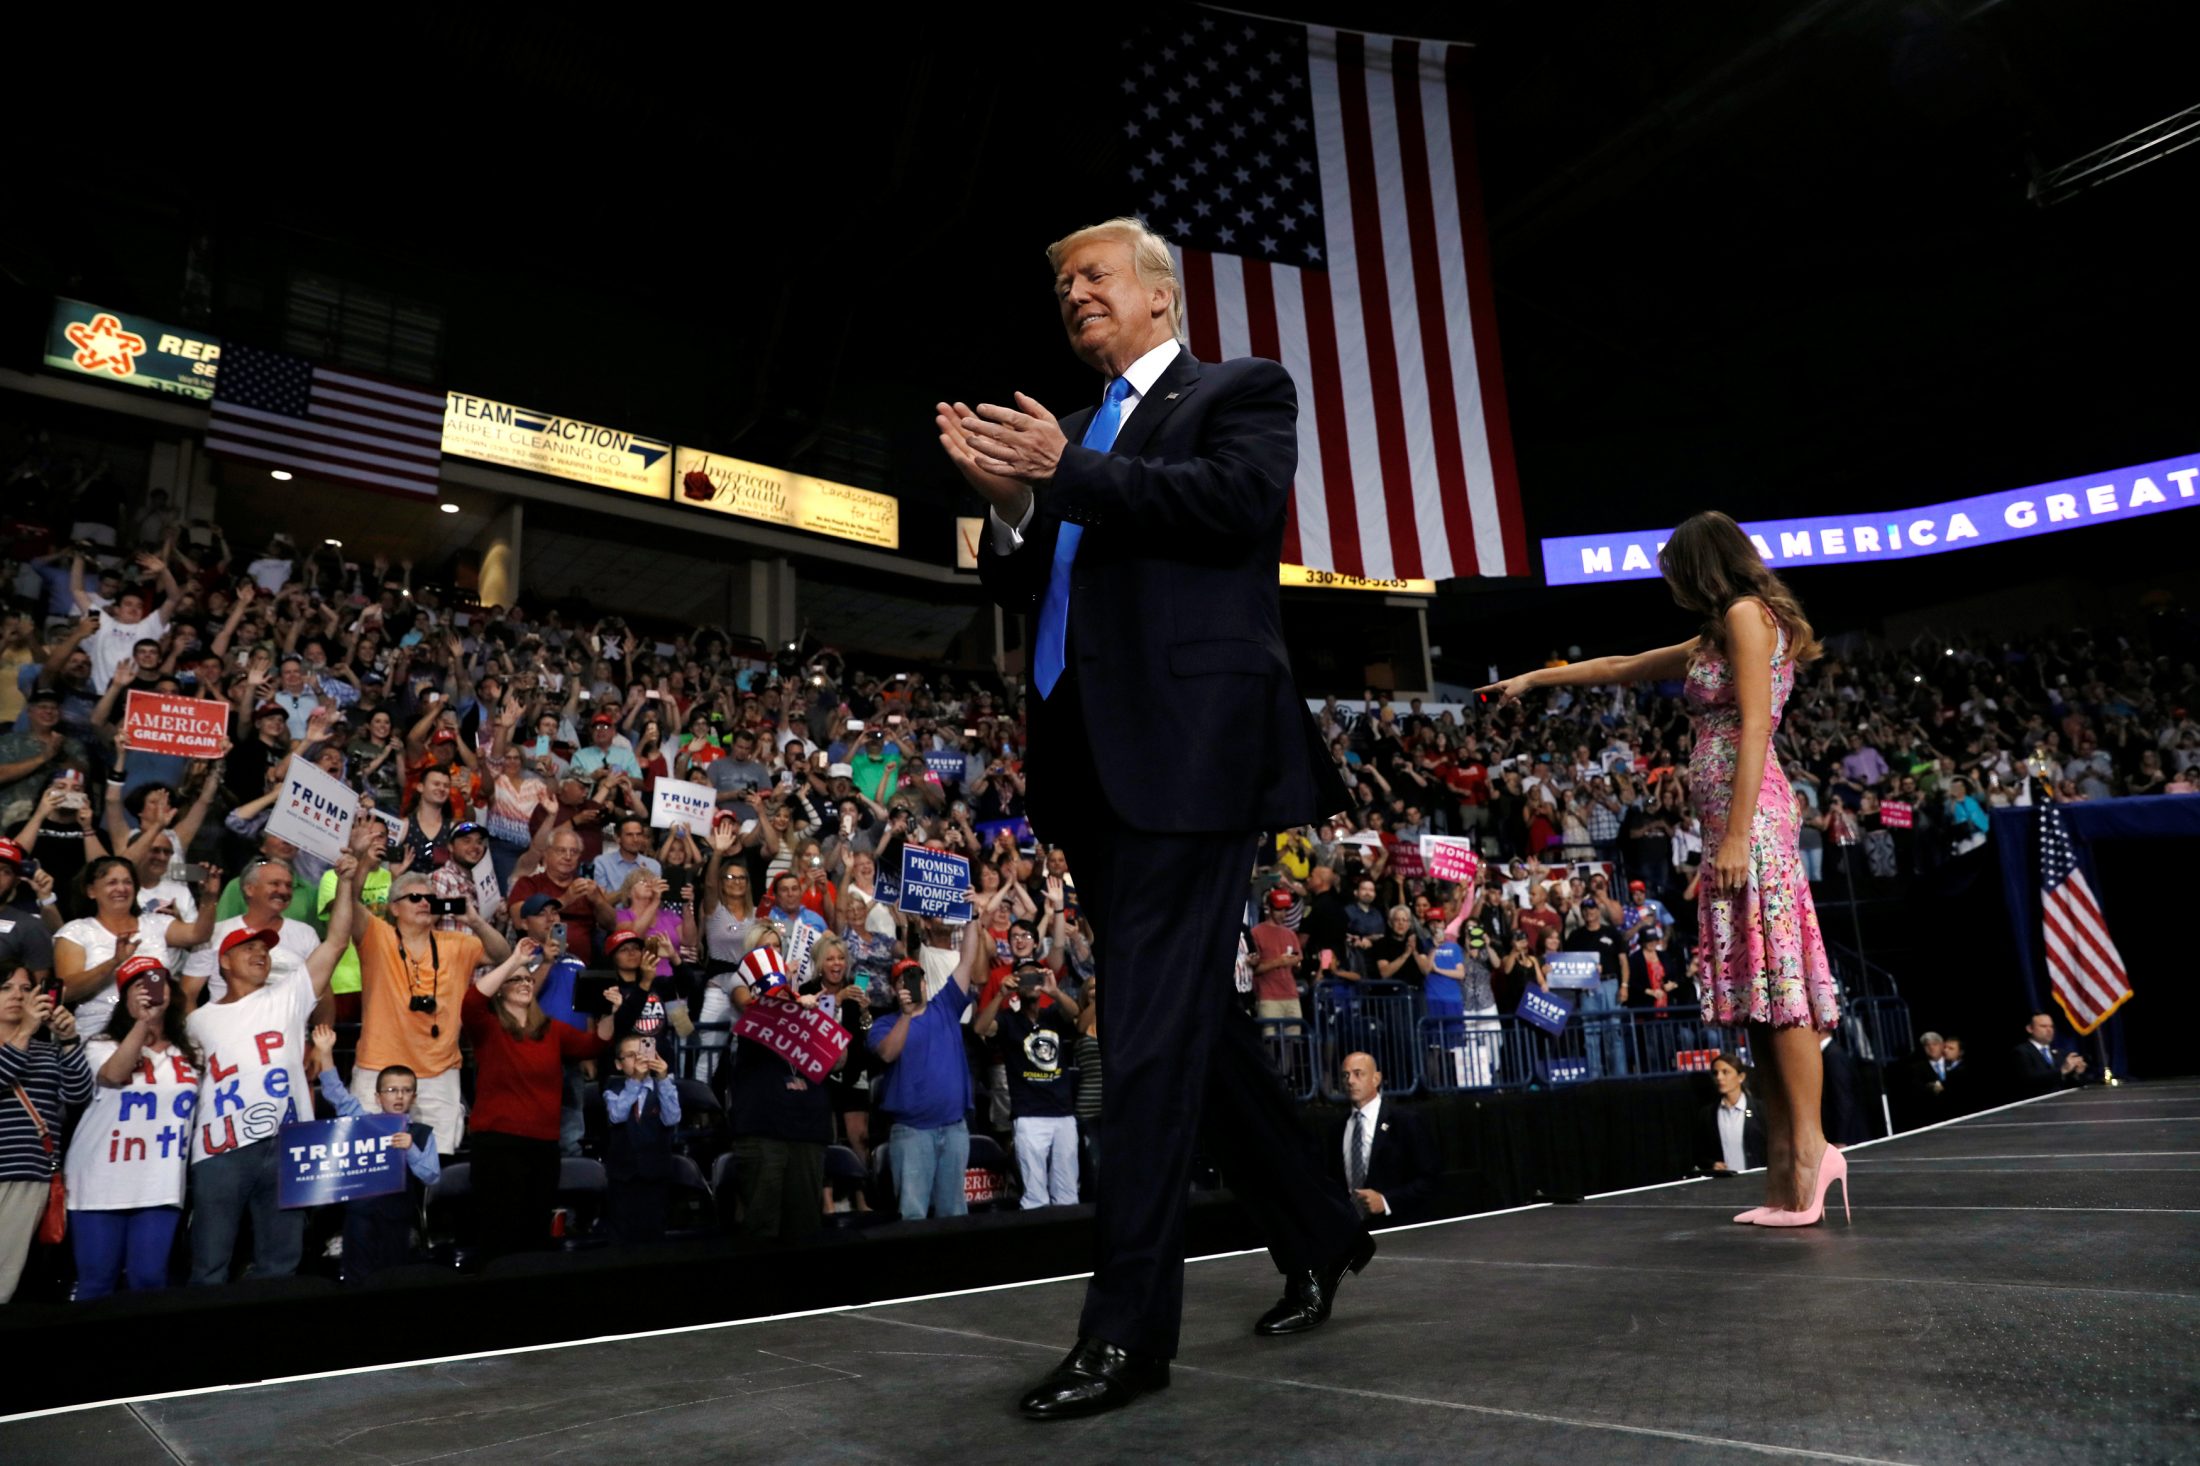 President Donald Trump and first lady Melania Trump take the stage for a rally with supporters in an arena in Youngstown, Ohio. Photo by Jonathan Ernst/Reuters